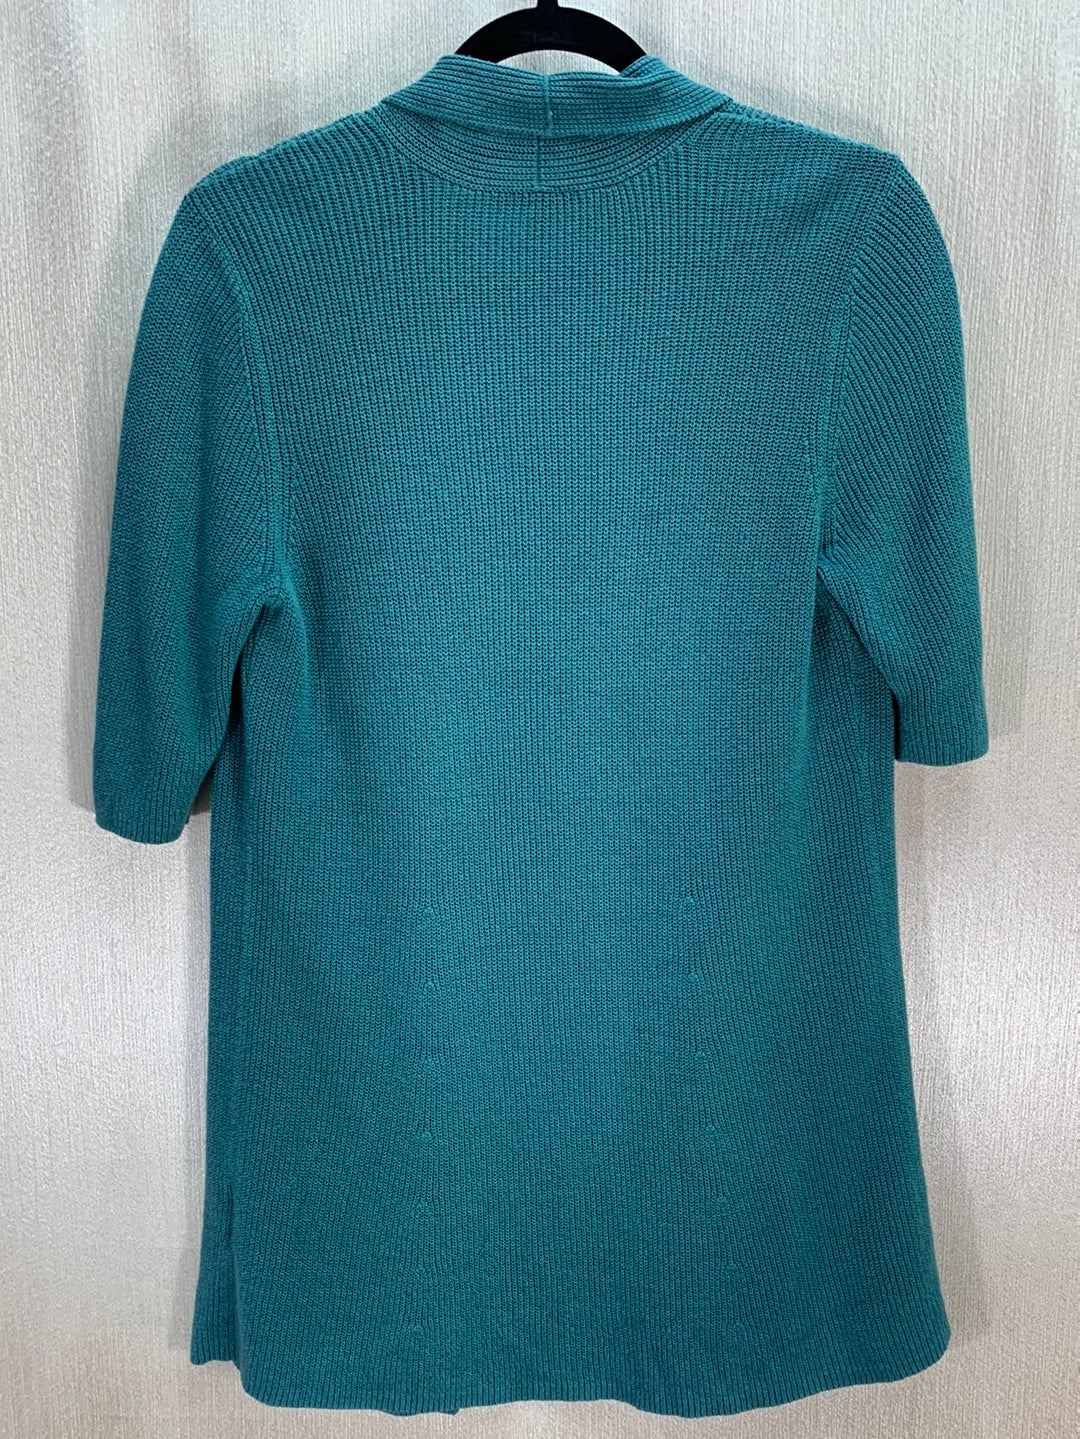 EILEEN FISHER turquoise blue Cotton Blend Short Sleeve Open Cardigan - L